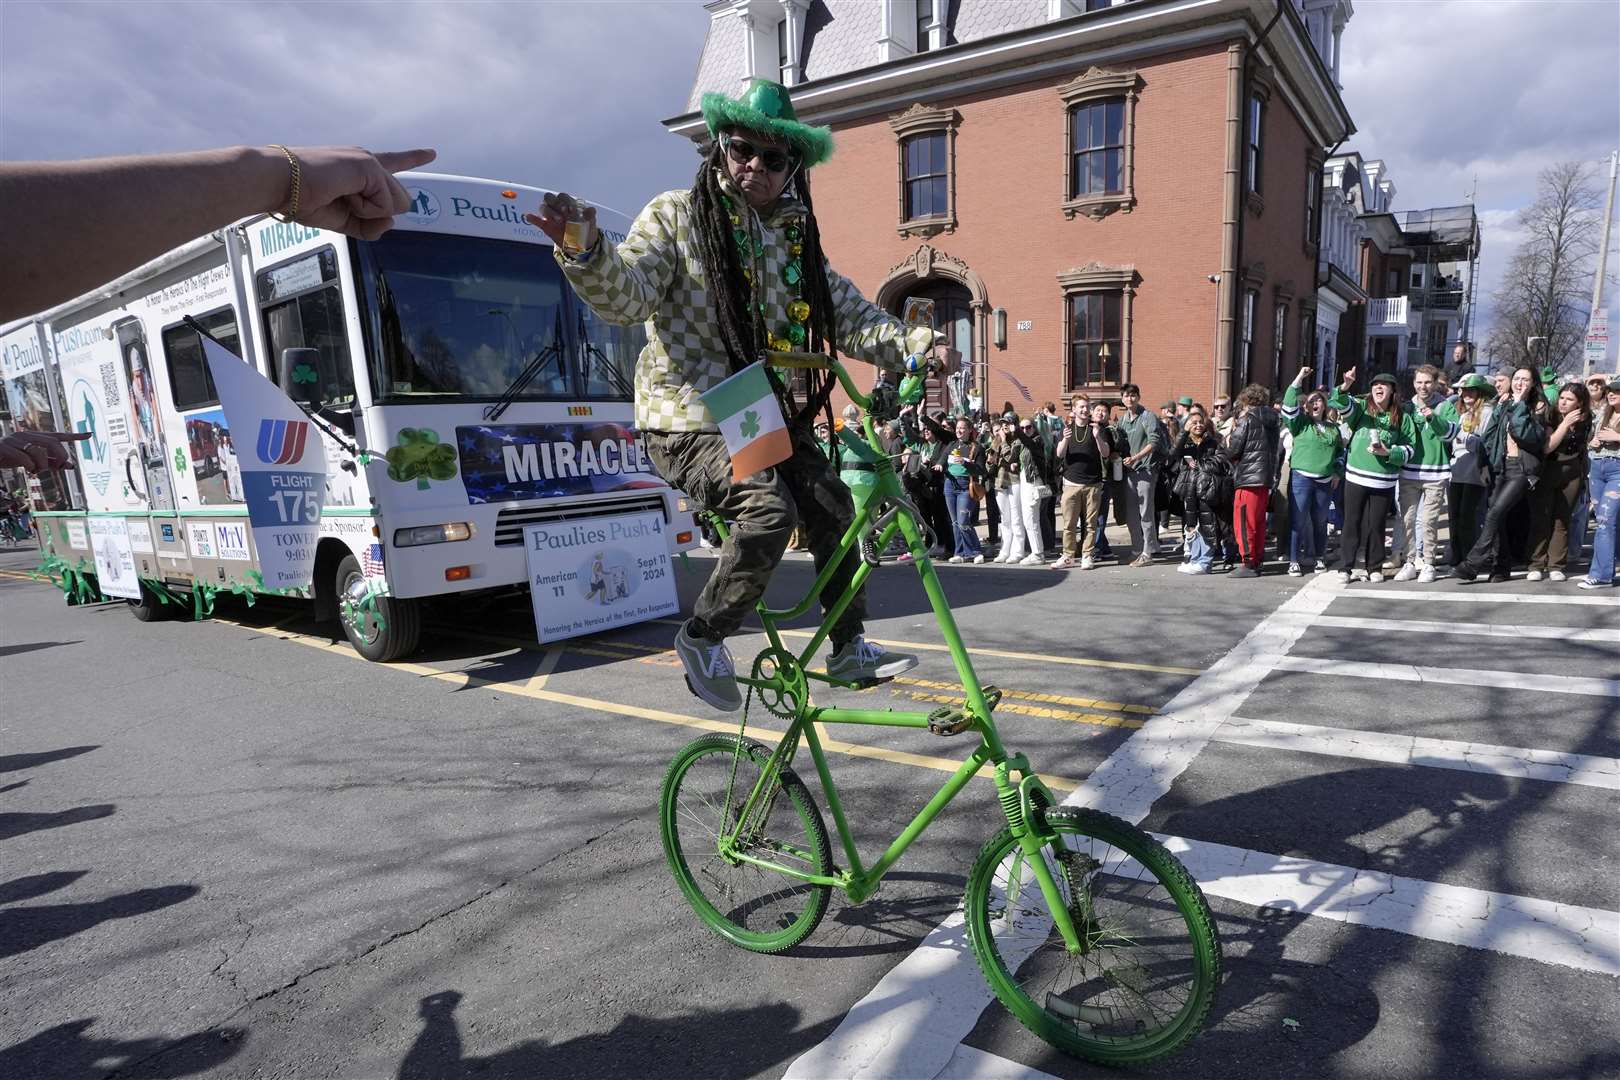 A man on a bicycle greets spectators during the St Patrick’s Day parade in the US city of Boston (Steven Senne/AP)